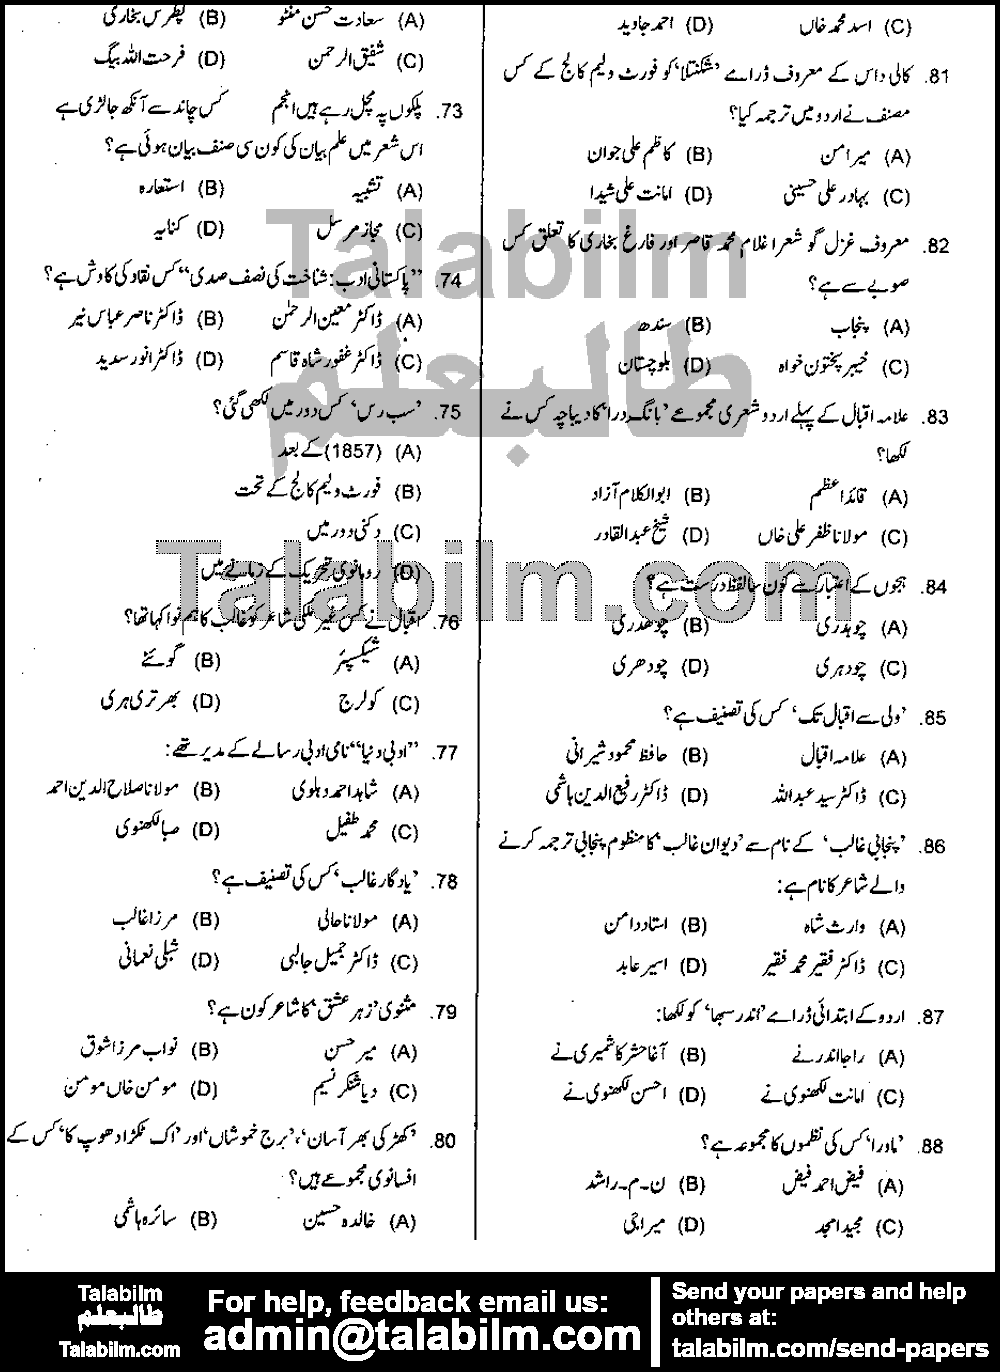 Urdu Elementary School Educator 0 past paper for 2019 Page No. 5